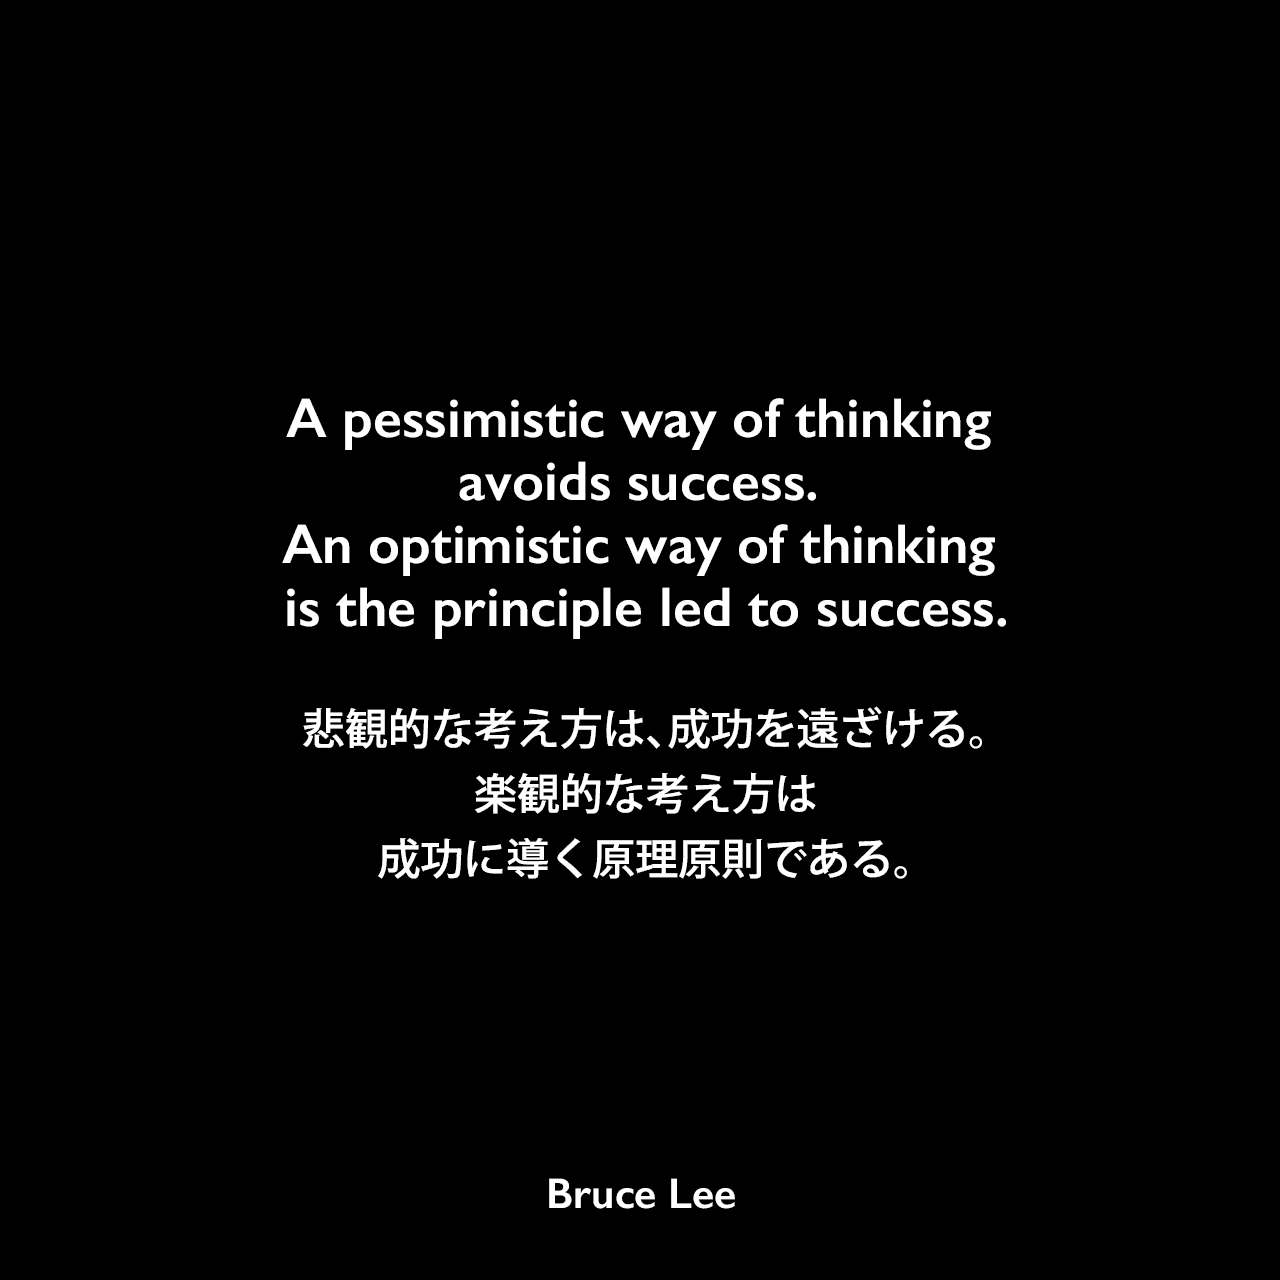 A pessimistic way of thinking avoids success. An optimistic way of thinking is the principle led to success.悲観的な考え方は、成功を遠ざける。楽観的な考え方は、成功に導く原理原則である。Bruce Lee